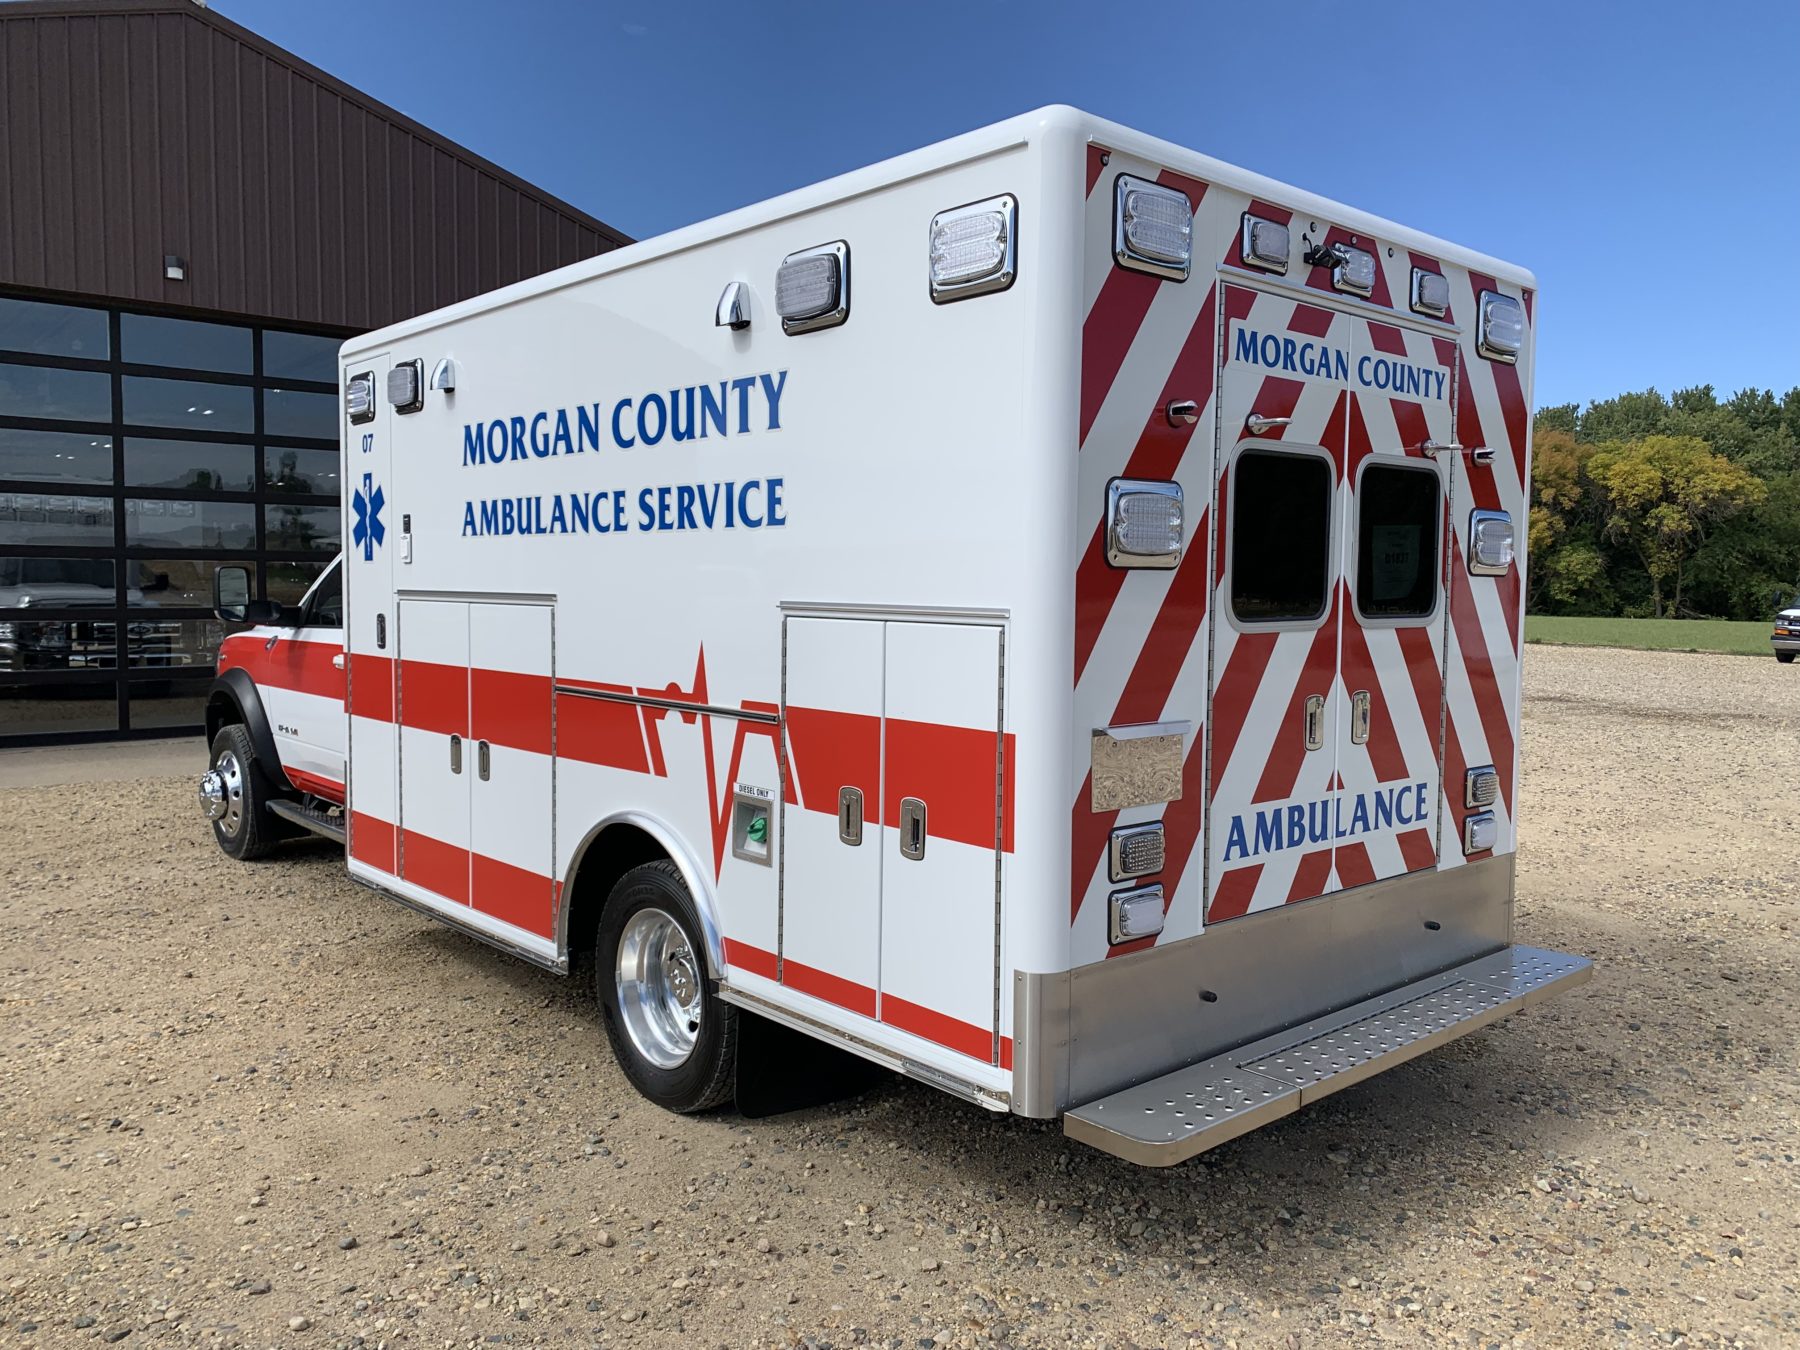 2021 Ram 4500 4x4 Heavy Duty Ambulance For Sale – Picture 5